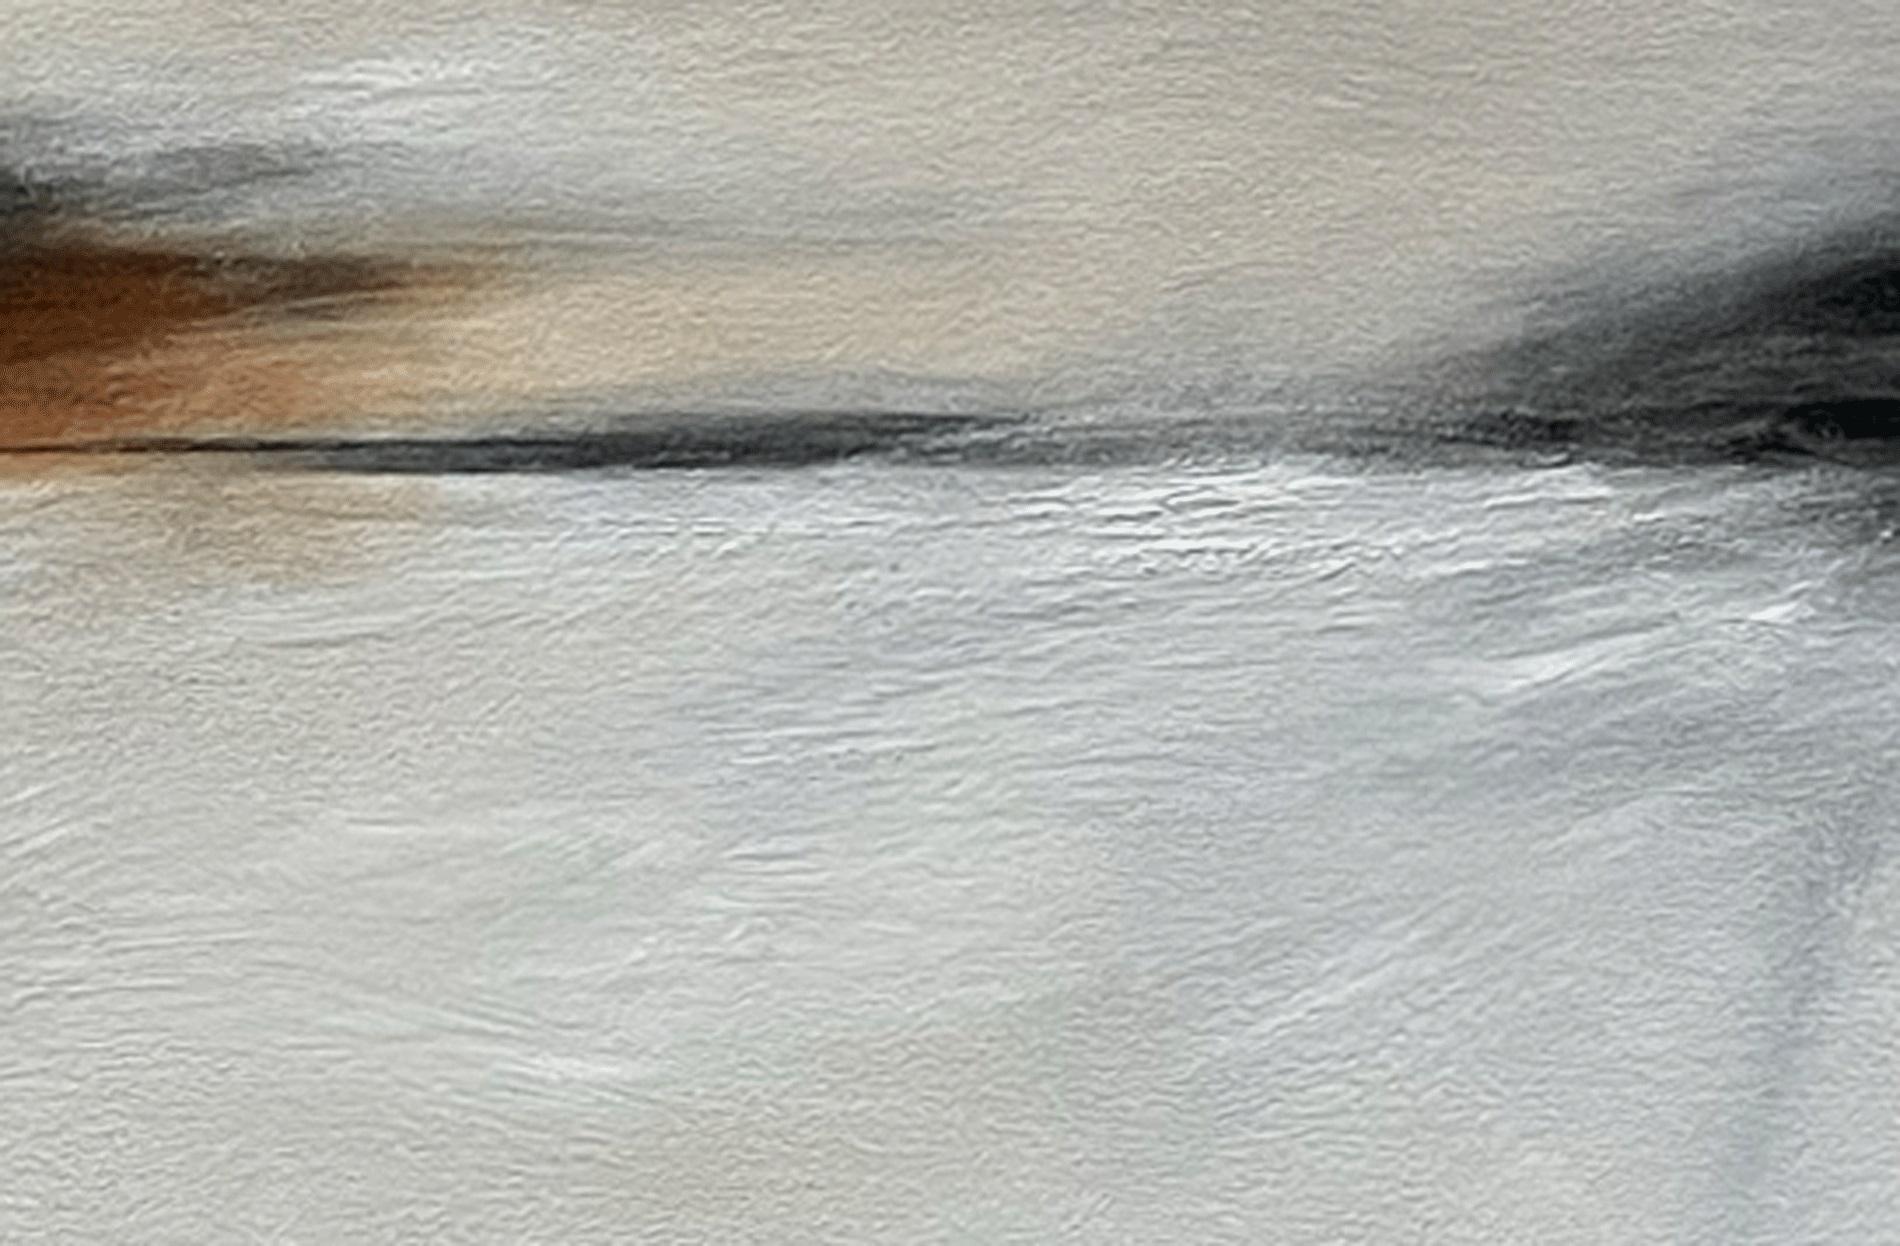 Kiss the Space, Painting, Oil on Canvas - Gray Abstract Painting by Judy Hintz Cox